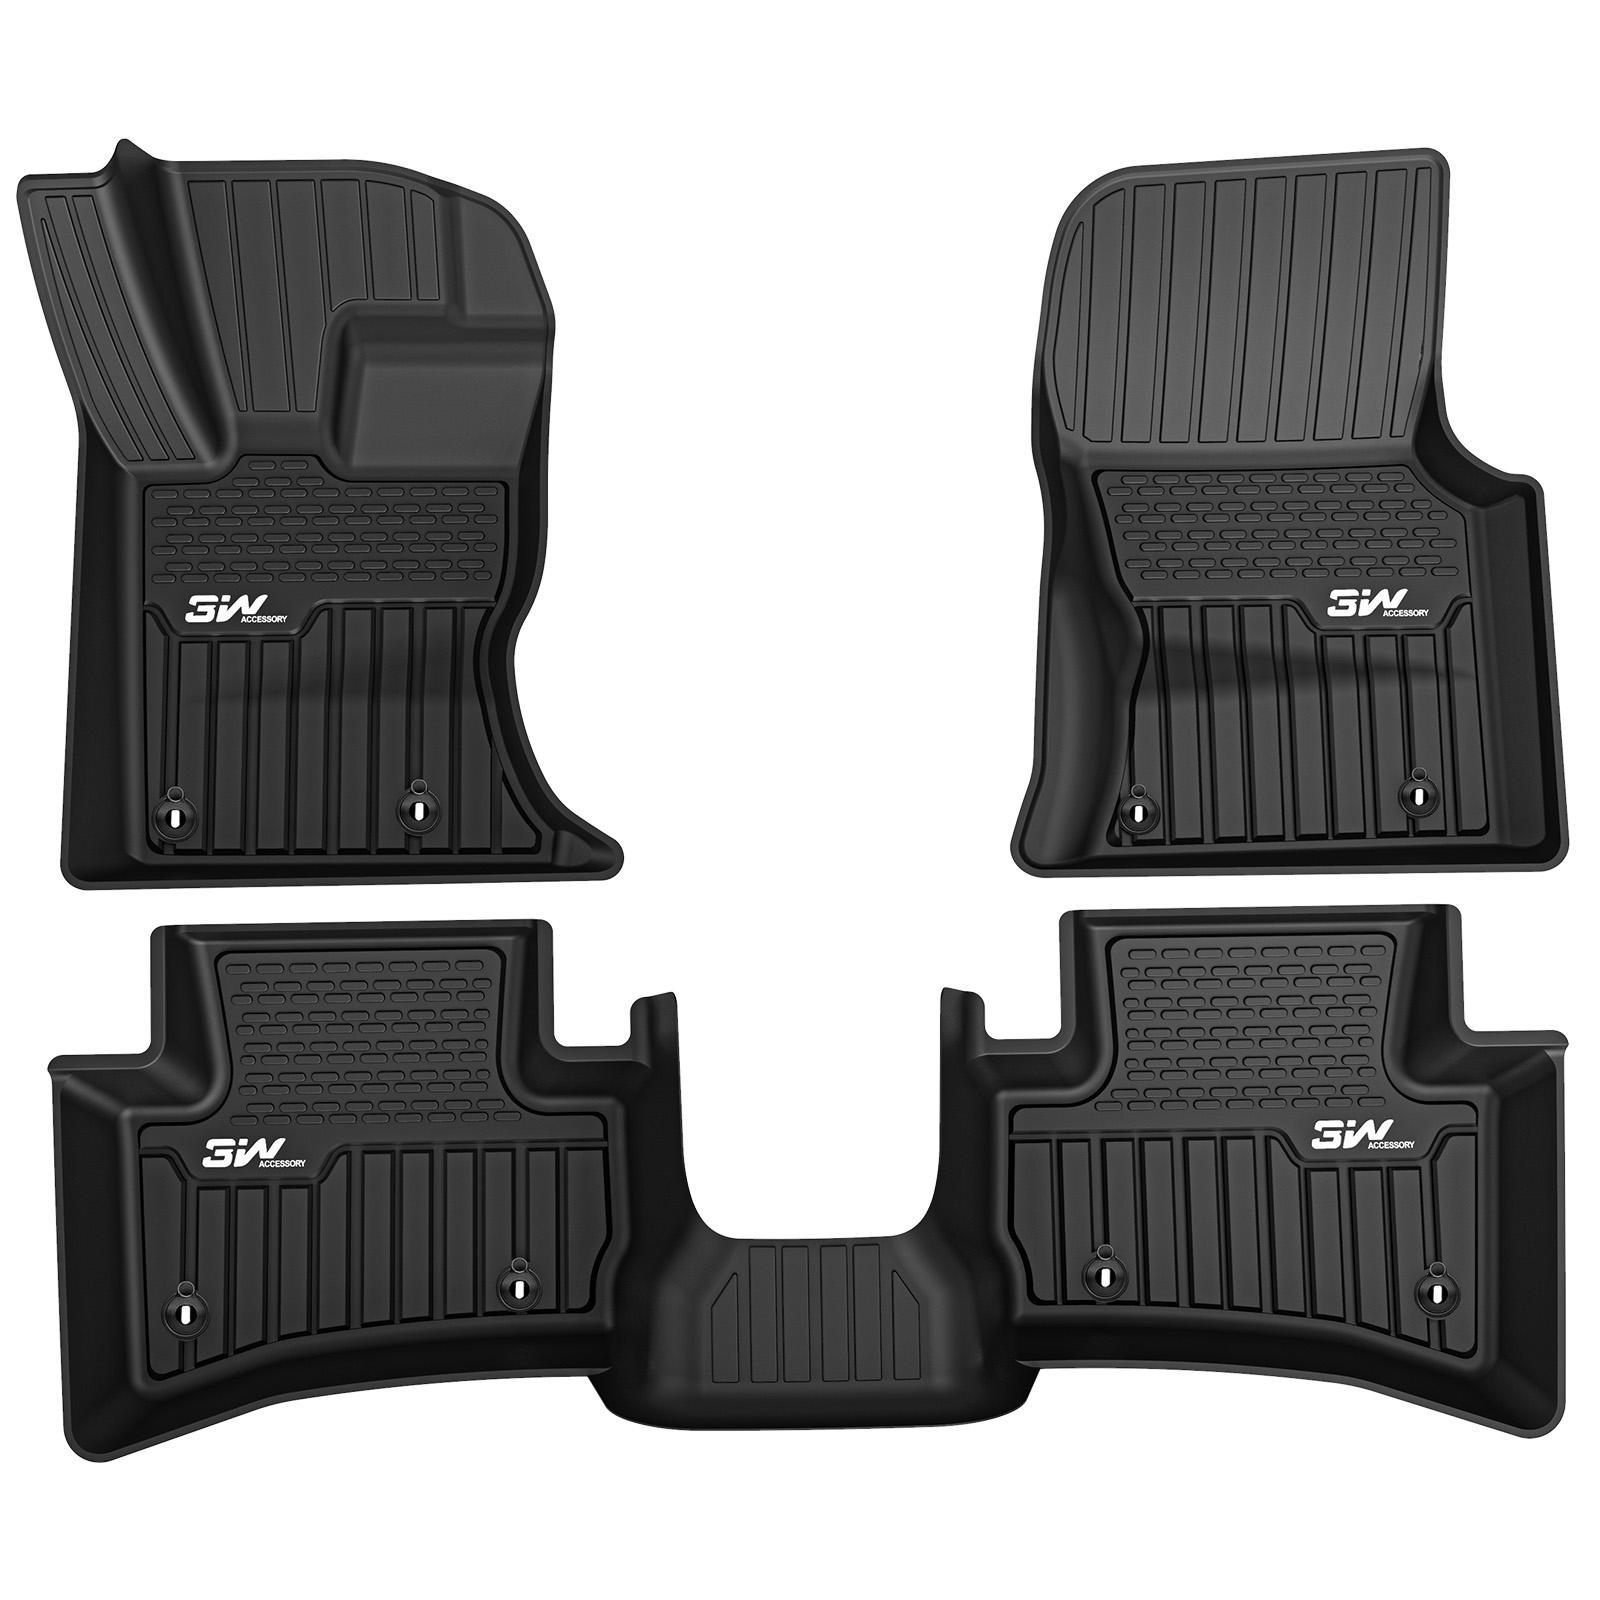 Range Rover Velar 2017-2025 Custom Floor Mats TPE Material & All-Weather Protection Vehicles & Parts 3Wliners 2017-2025 Velar 2017-2025 1st&2nd Row Mats